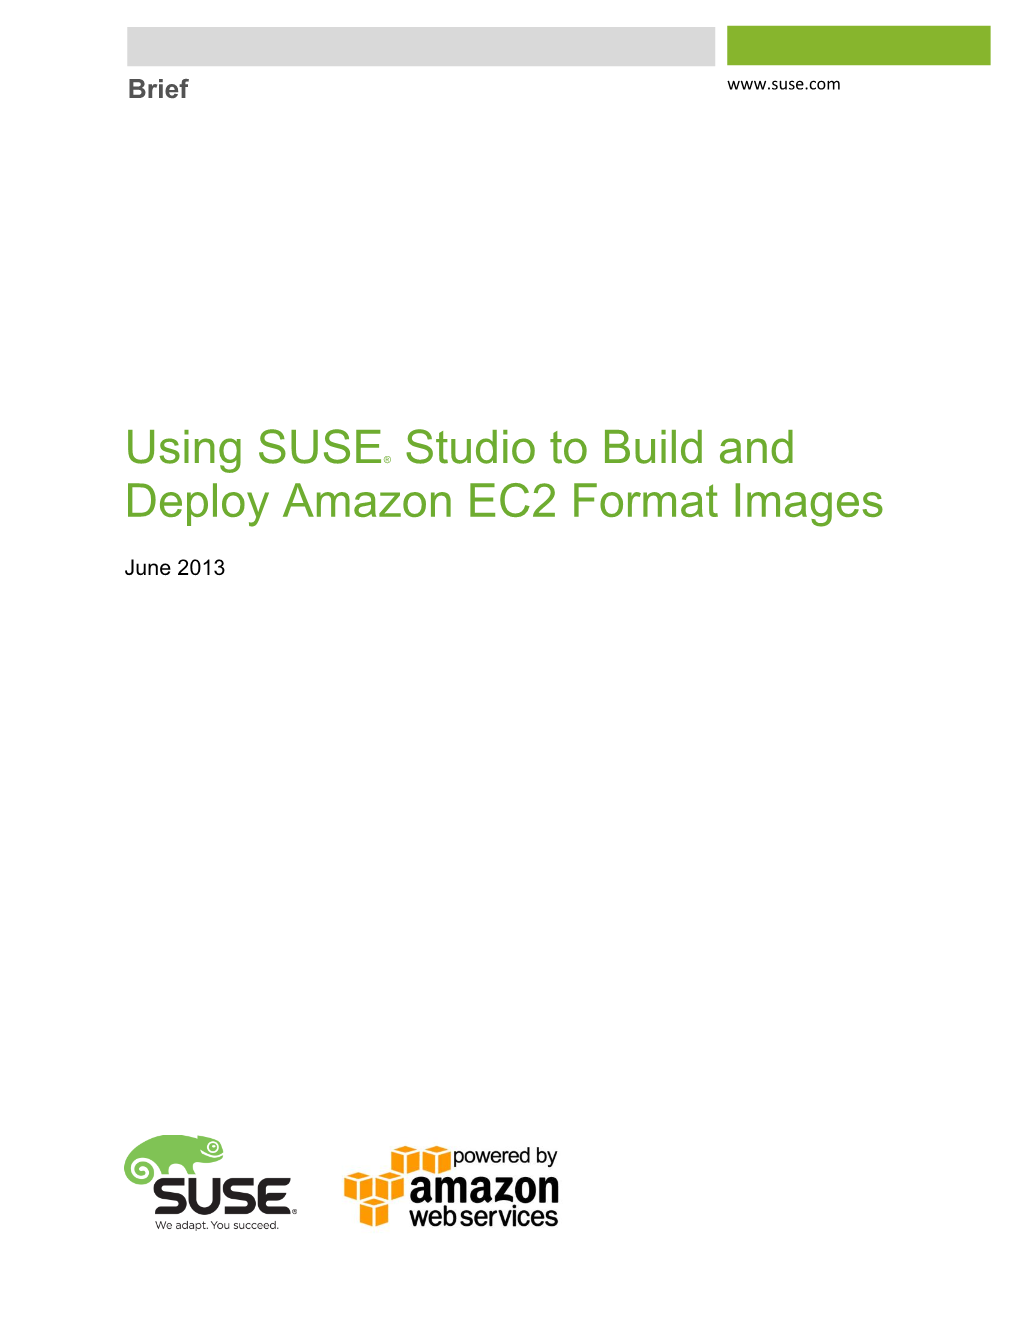 Using SUSE® Studio to Build and Deploy Amazon EC2 Format Images